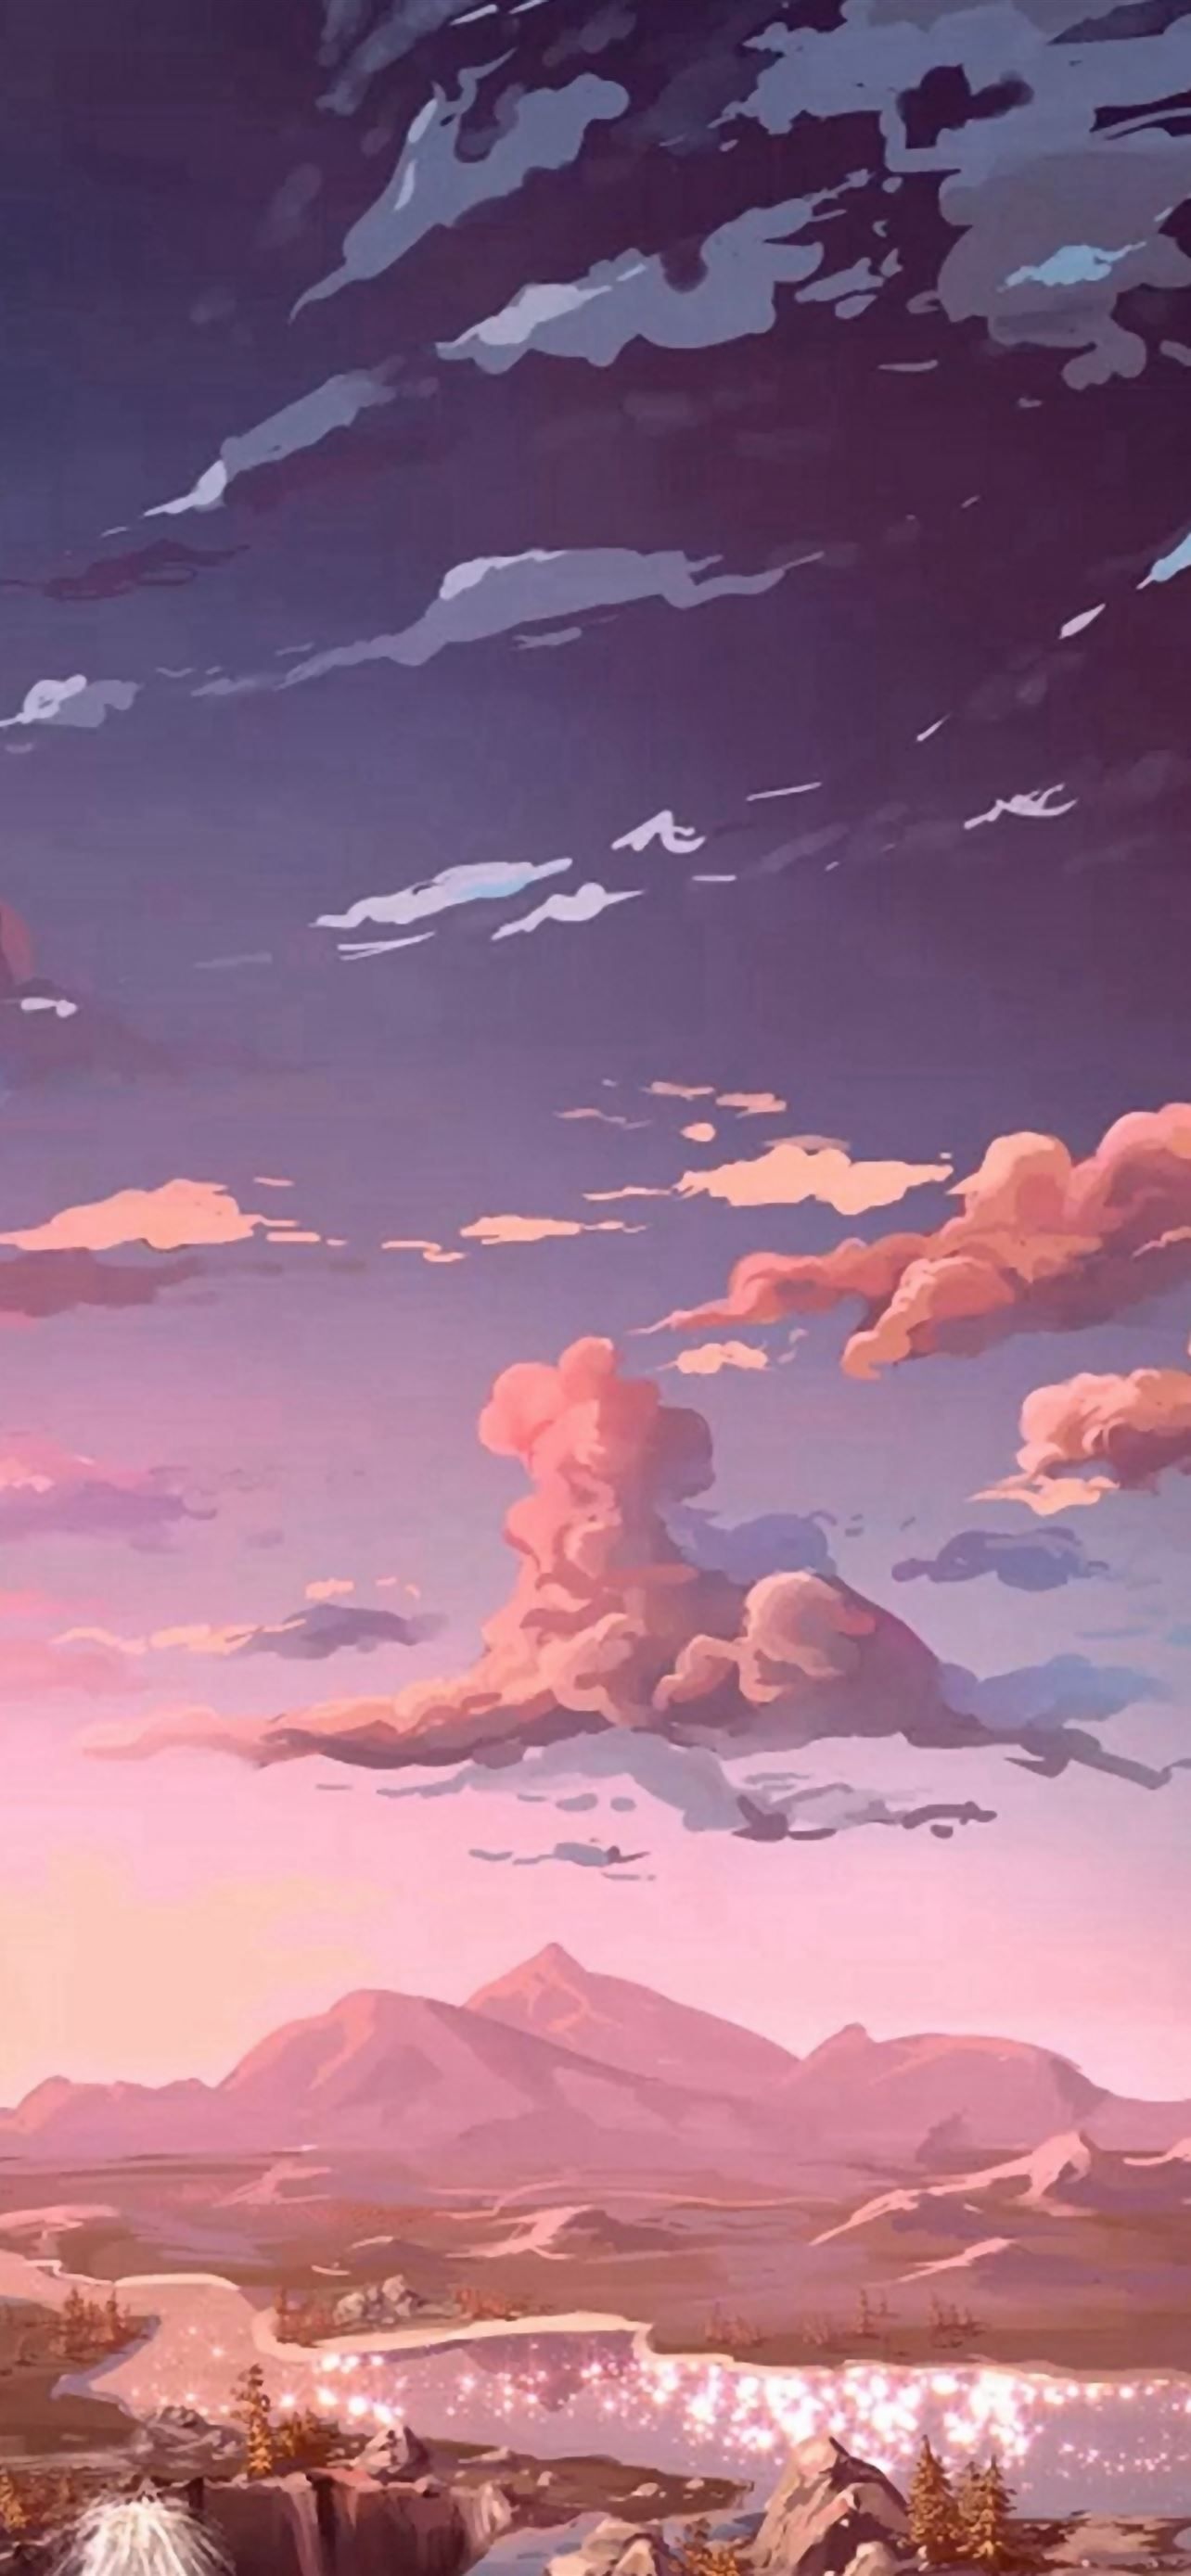 Aesthetic wallpaper for phone of a pink sunset over a mountain range - Anime sunset